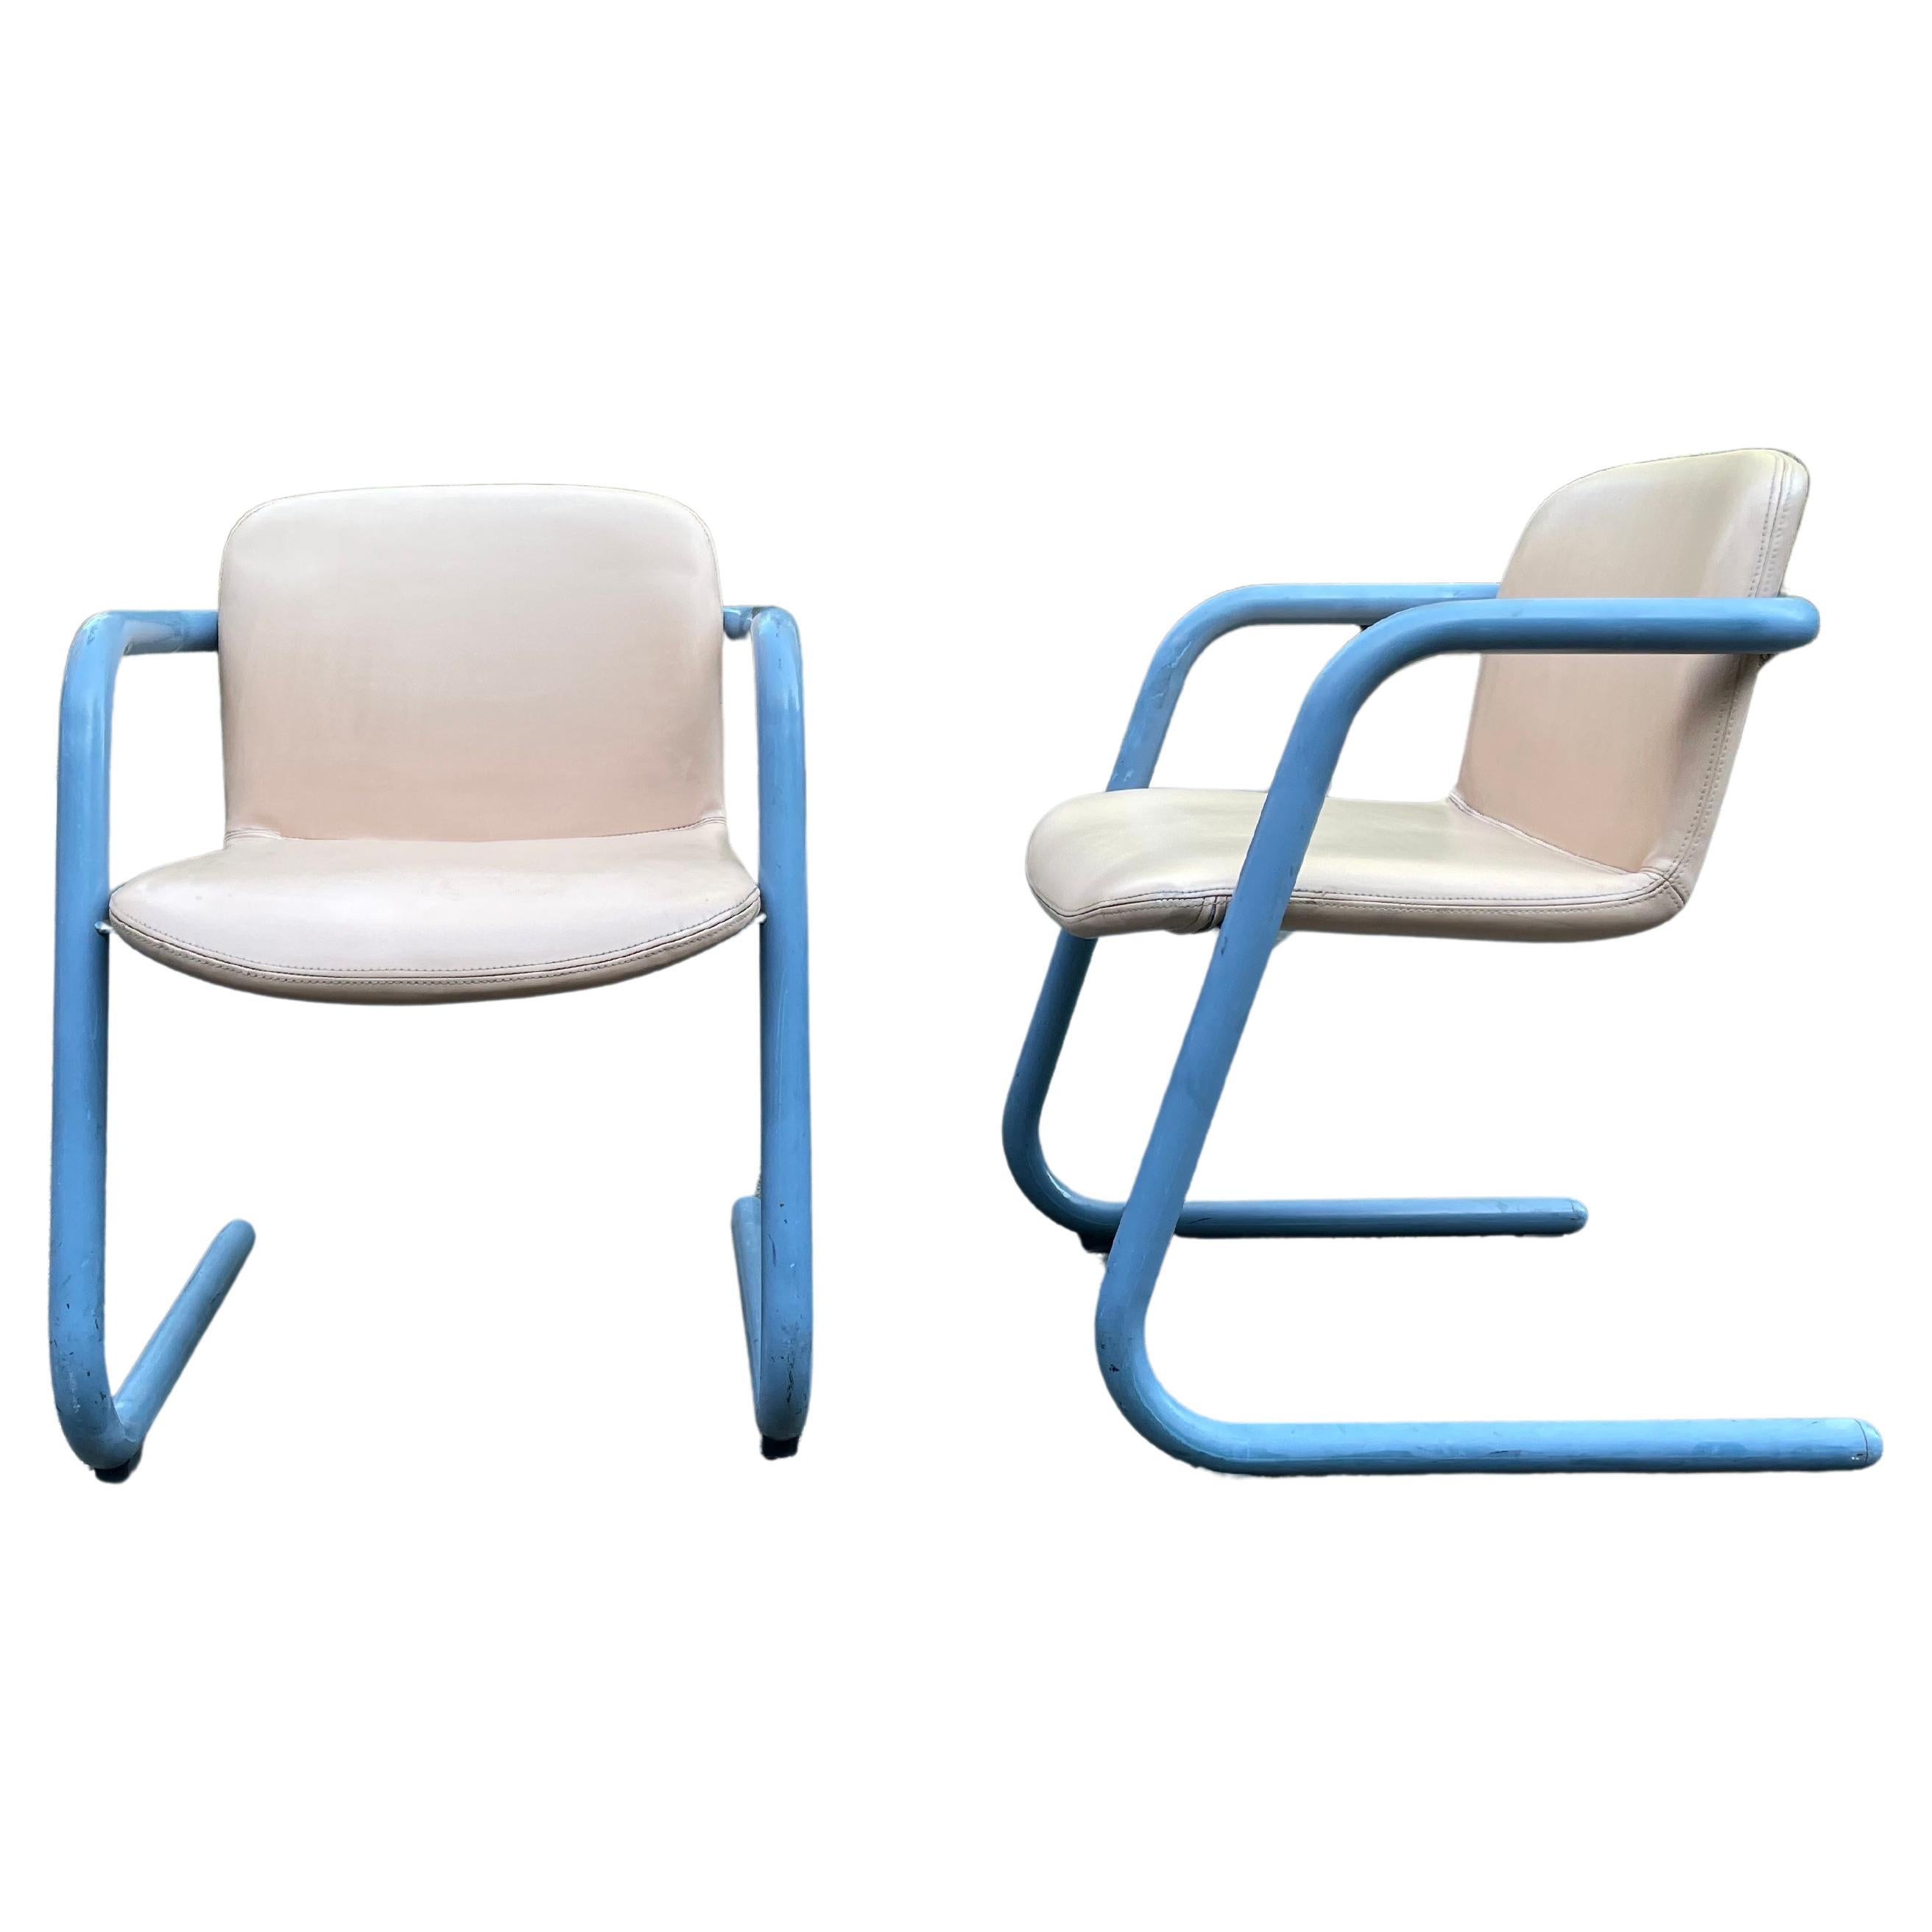 Mid-Century Kinetics Blue 100/300 Chairs by Salmon & Hamilton - Set of 2 For Sale